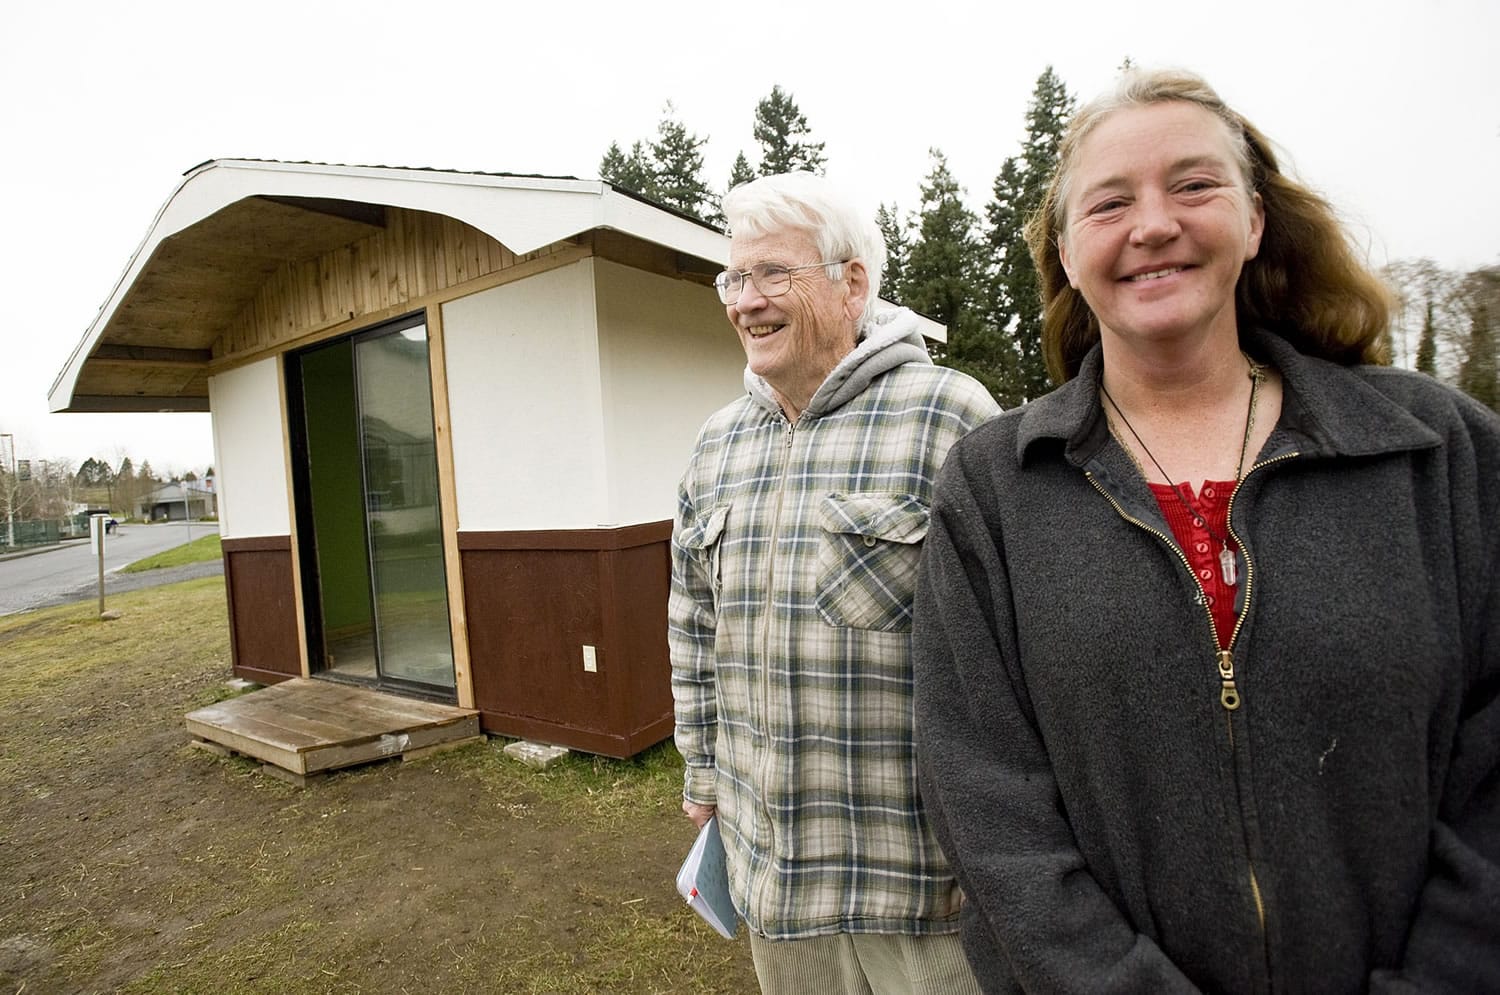 Retired builder Bill Barkley enlisted Shanin Zachman, a formerly homeless mom, to help him build this small prototype of an insulated single-room dwelling.